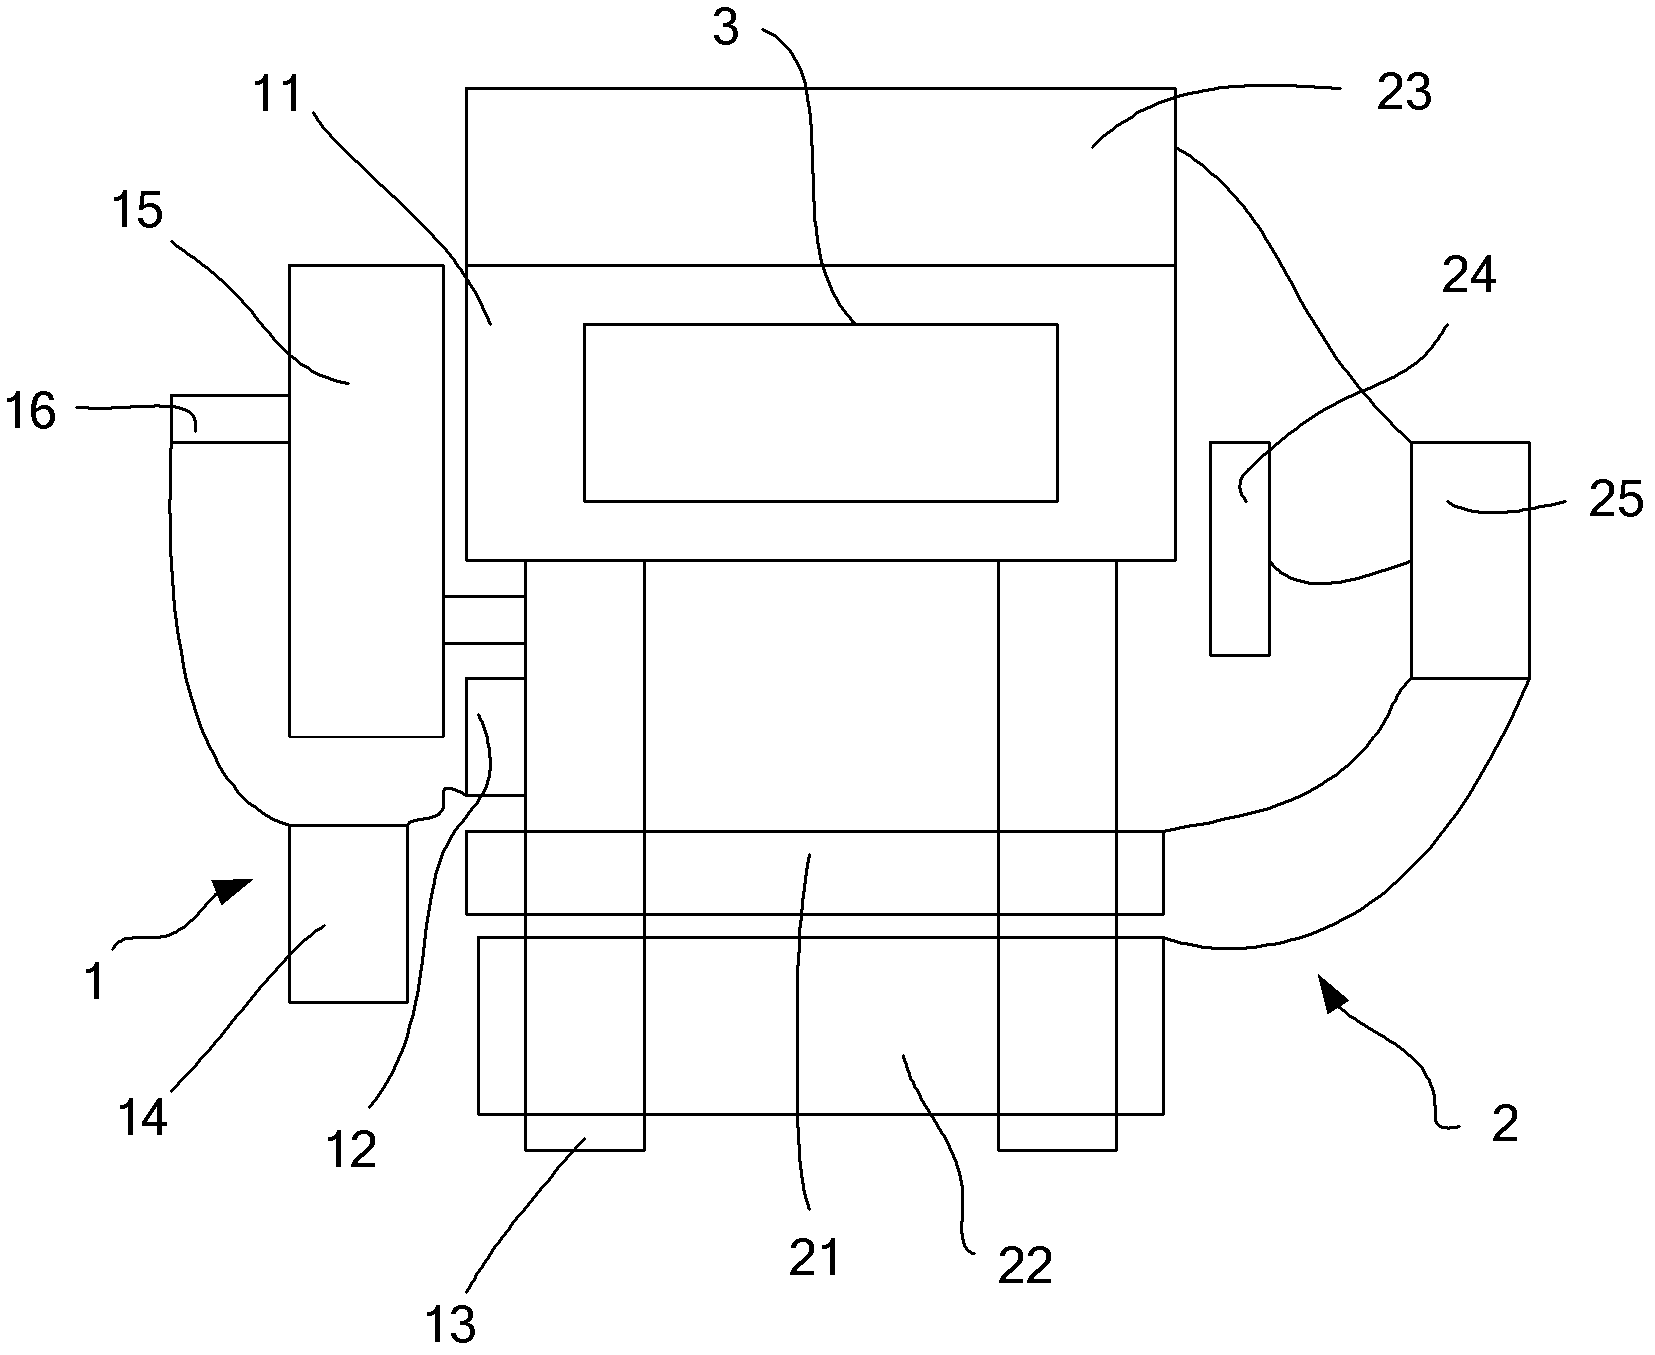 Paper cutting device capable of automatically adjusting tension and automatically guiding paper